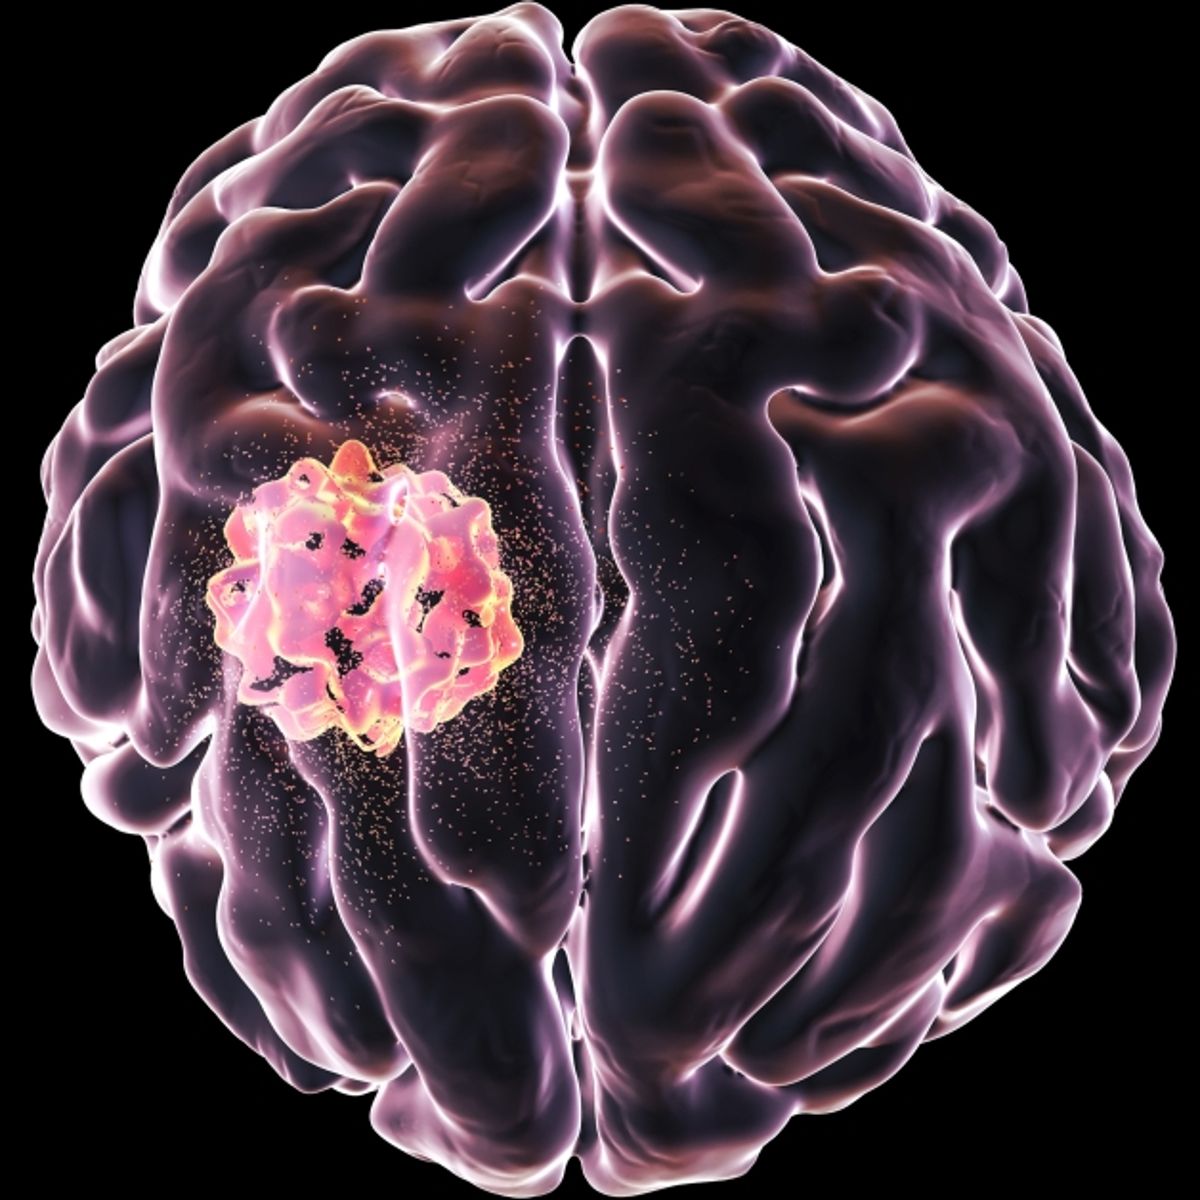 Did University Students Develop Compound That Kills Brain Cancer Cells? |  